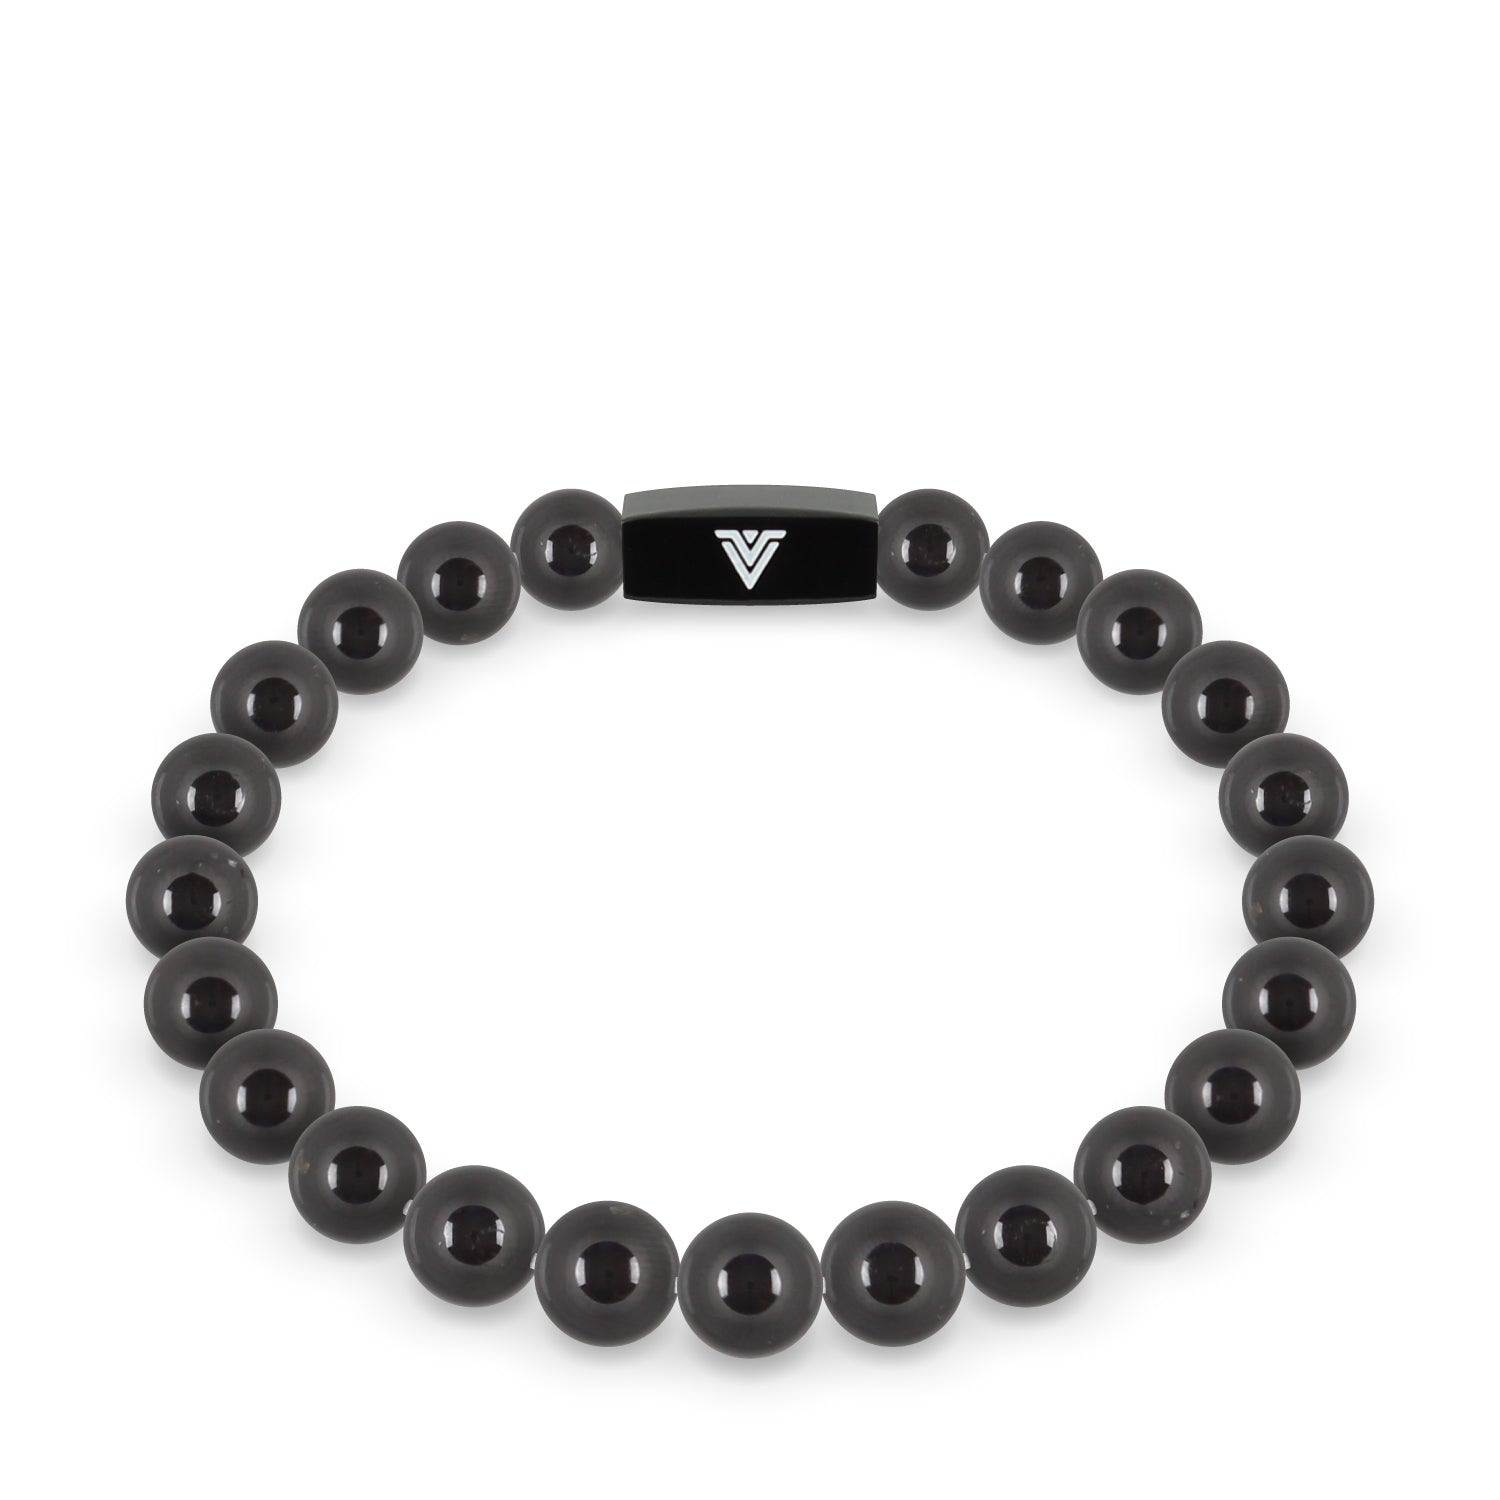 Front view of an 8mm Black Tourmaline crystal beaded stretch bracelet with black stainless steel logo bead made by Voltlin